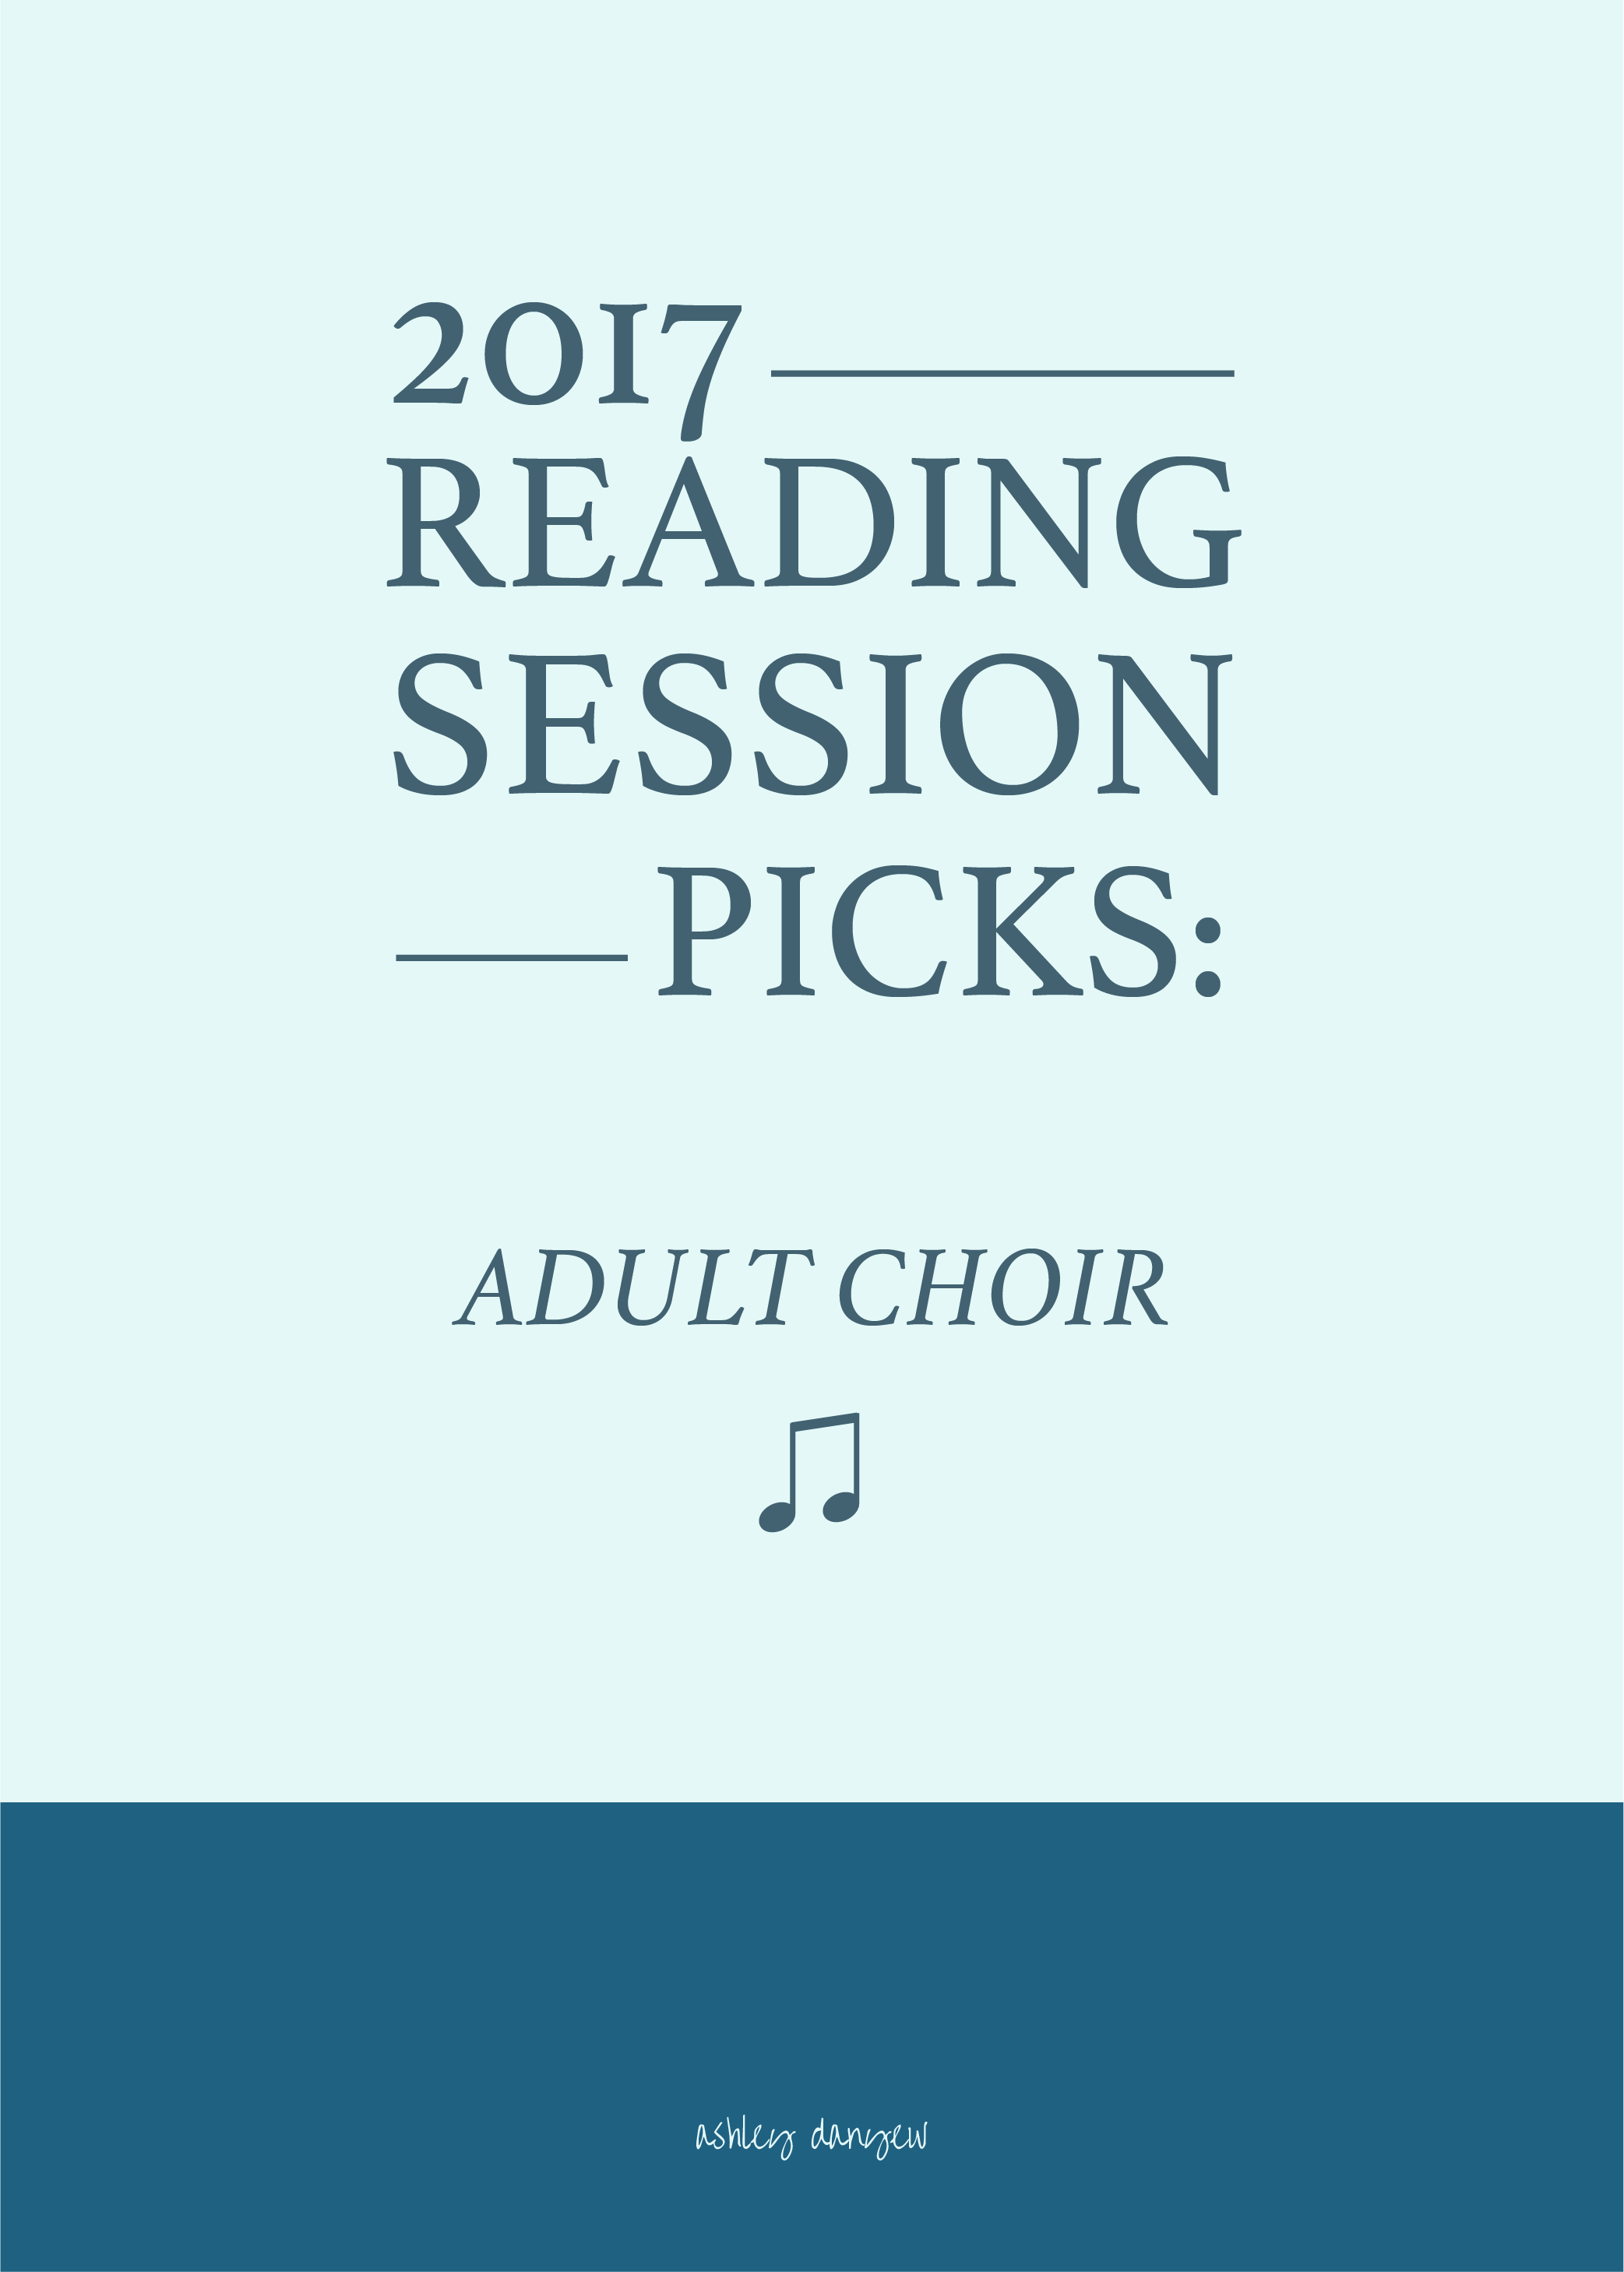 2017 Reading Session Picks_Adult Choir-06.png